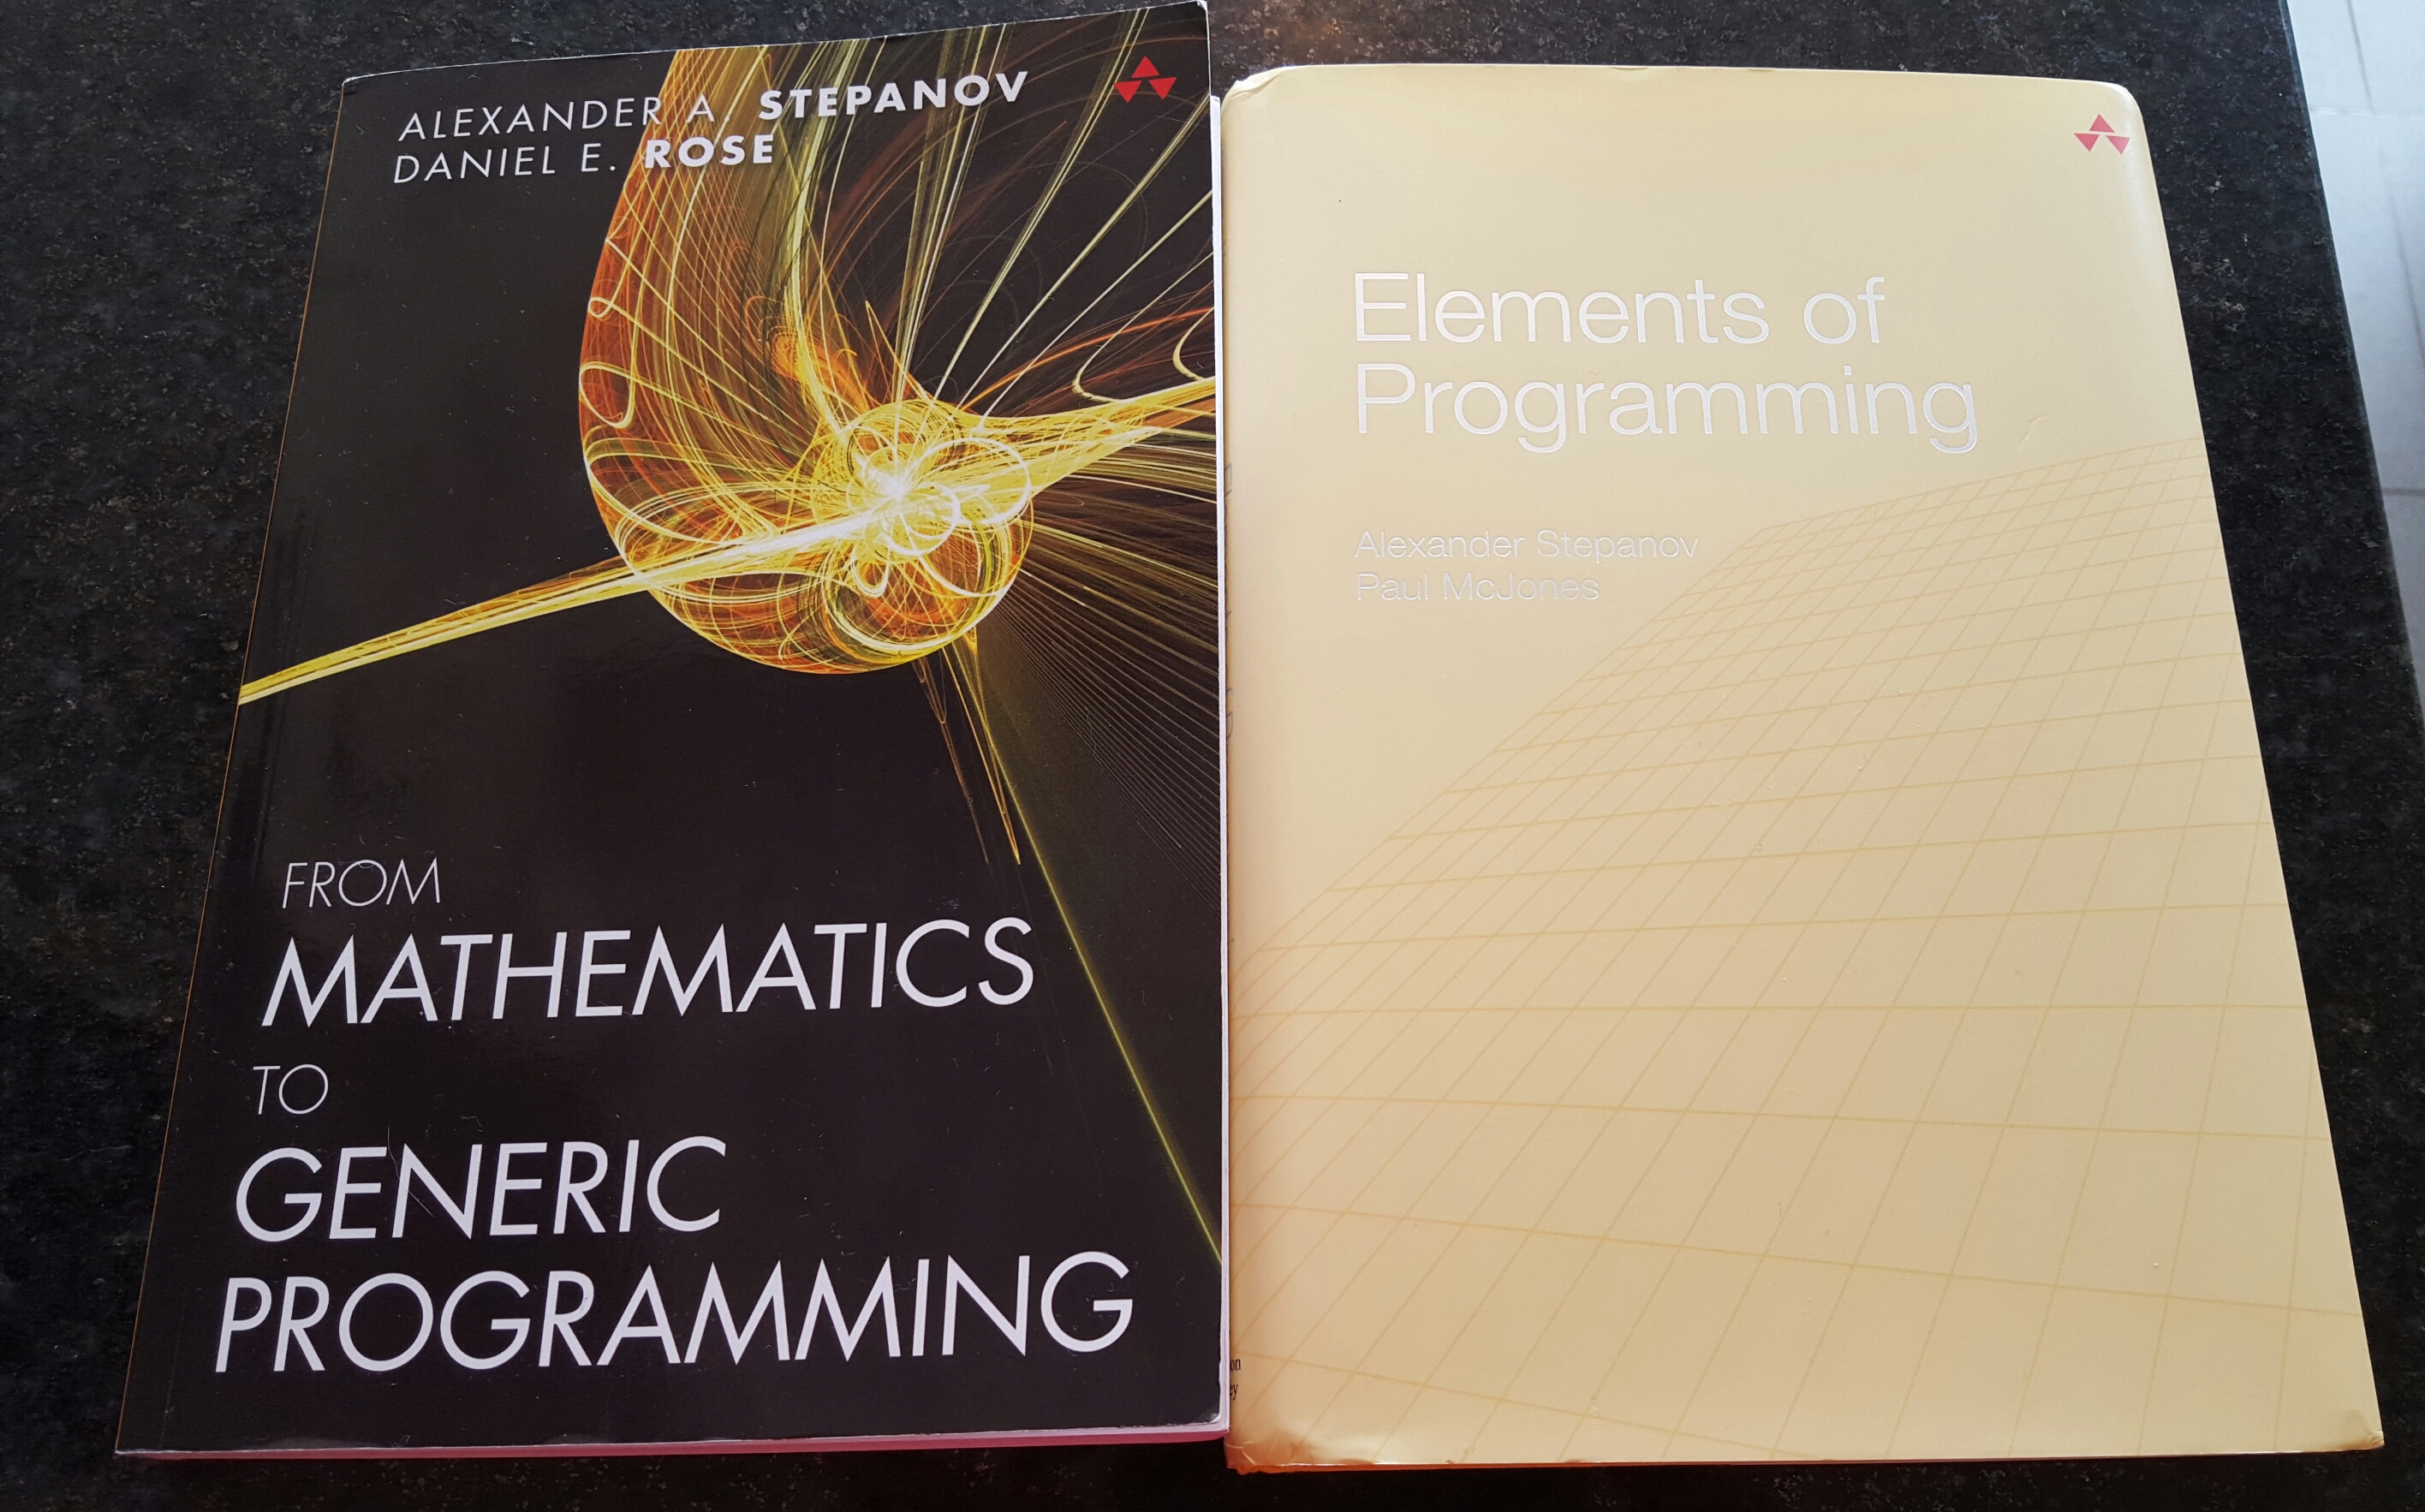 Elements of Programming and From Mathematics to Generic Programming